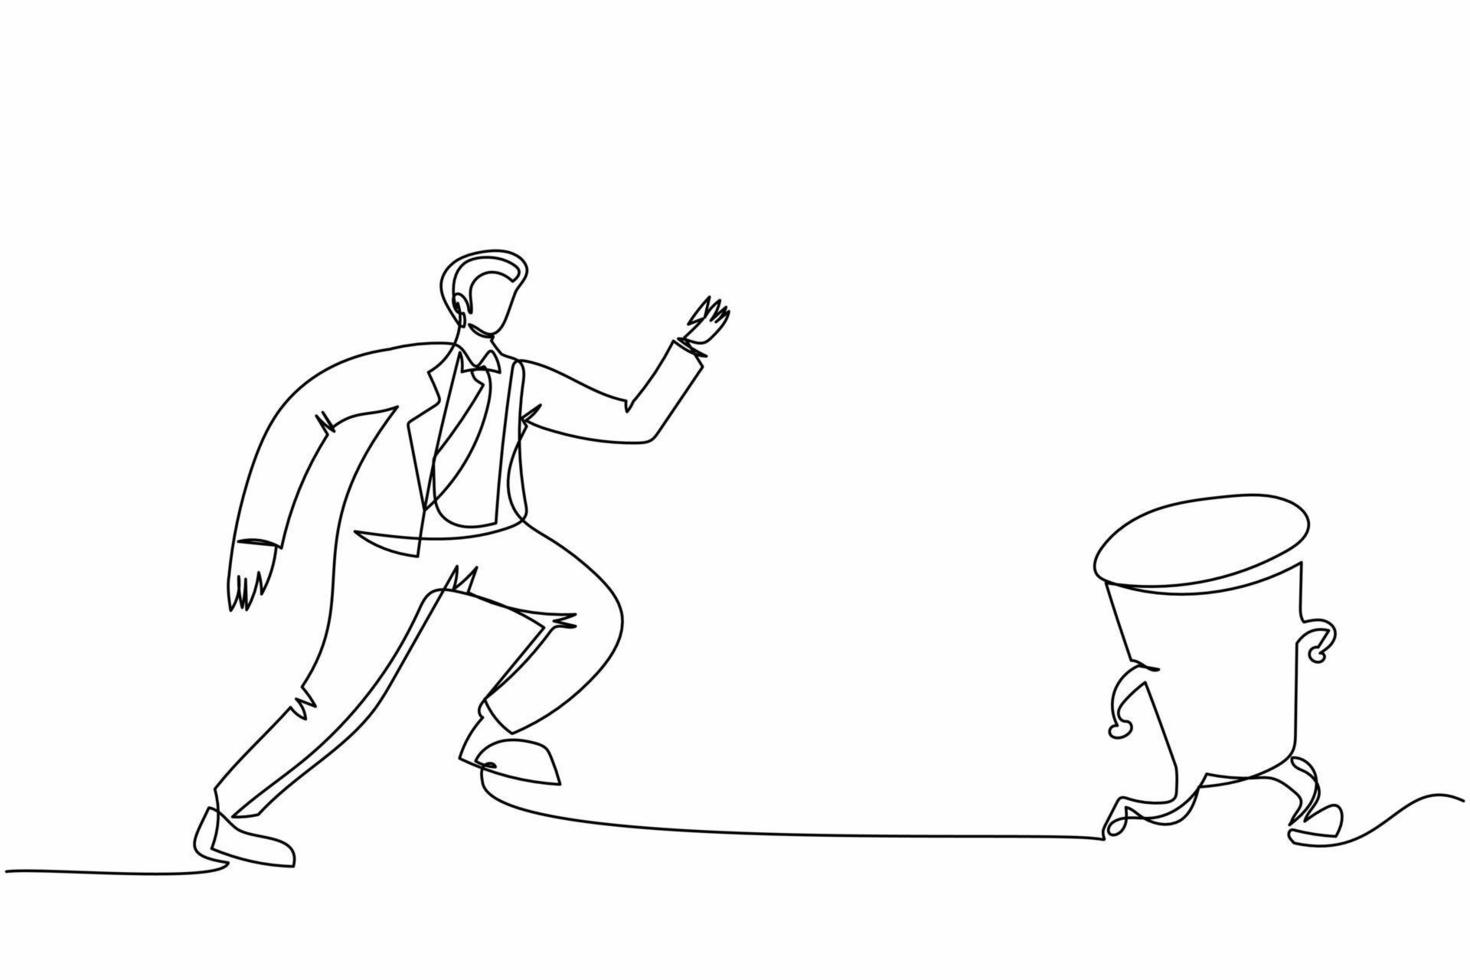 Single continuous line drawing businessman run chasing try to catch hourglass. Concept of stress, angry, burnout, deadlines, depression. Business metaphor. One line graphic design vector illustration